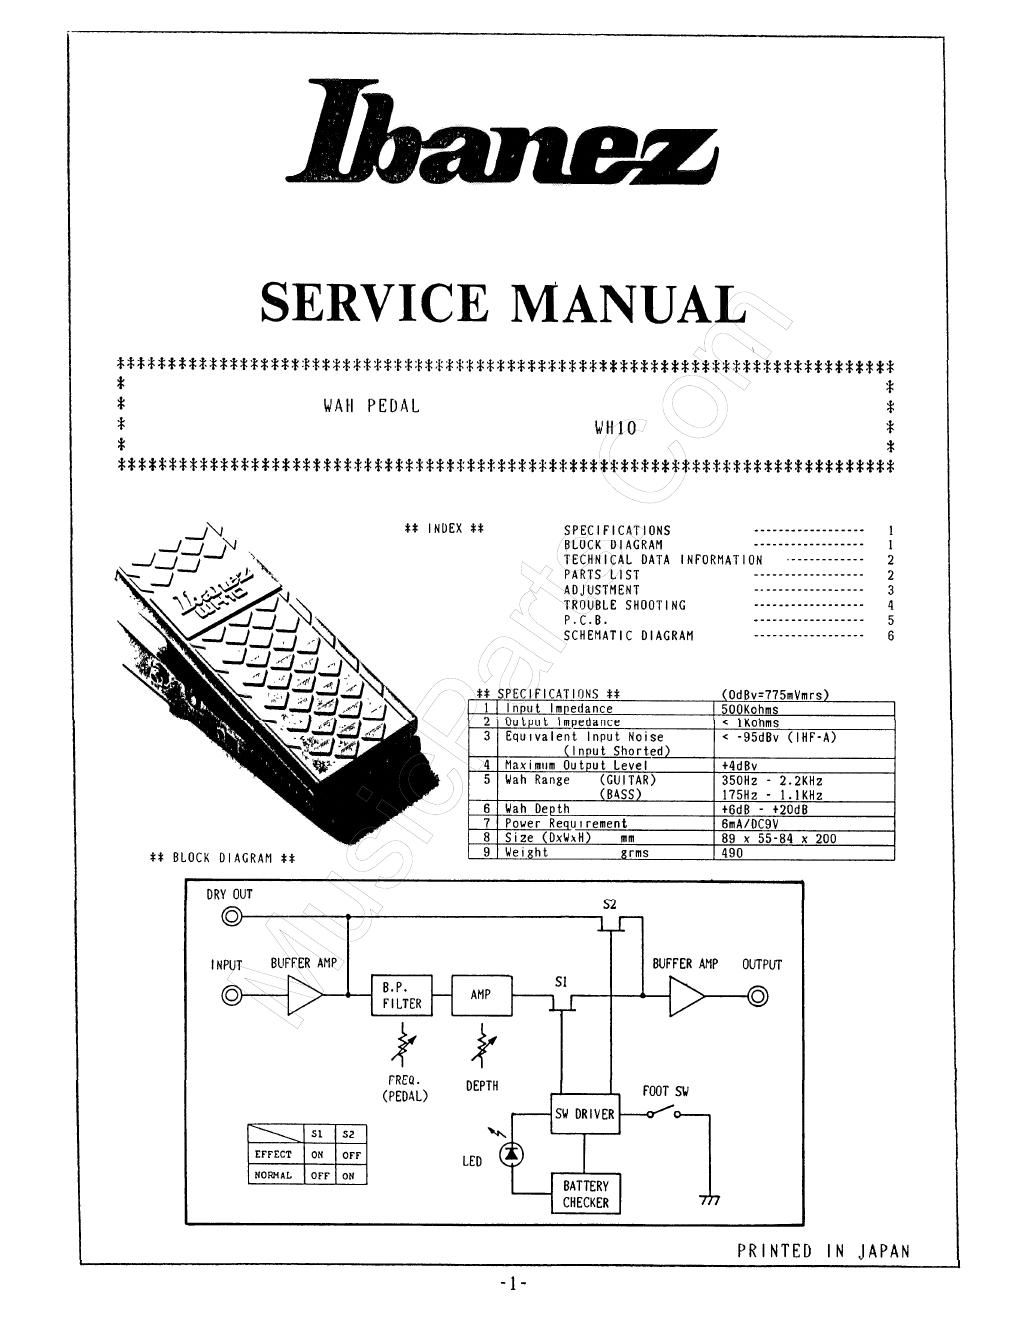 Ibanez WH 10 Service Manual